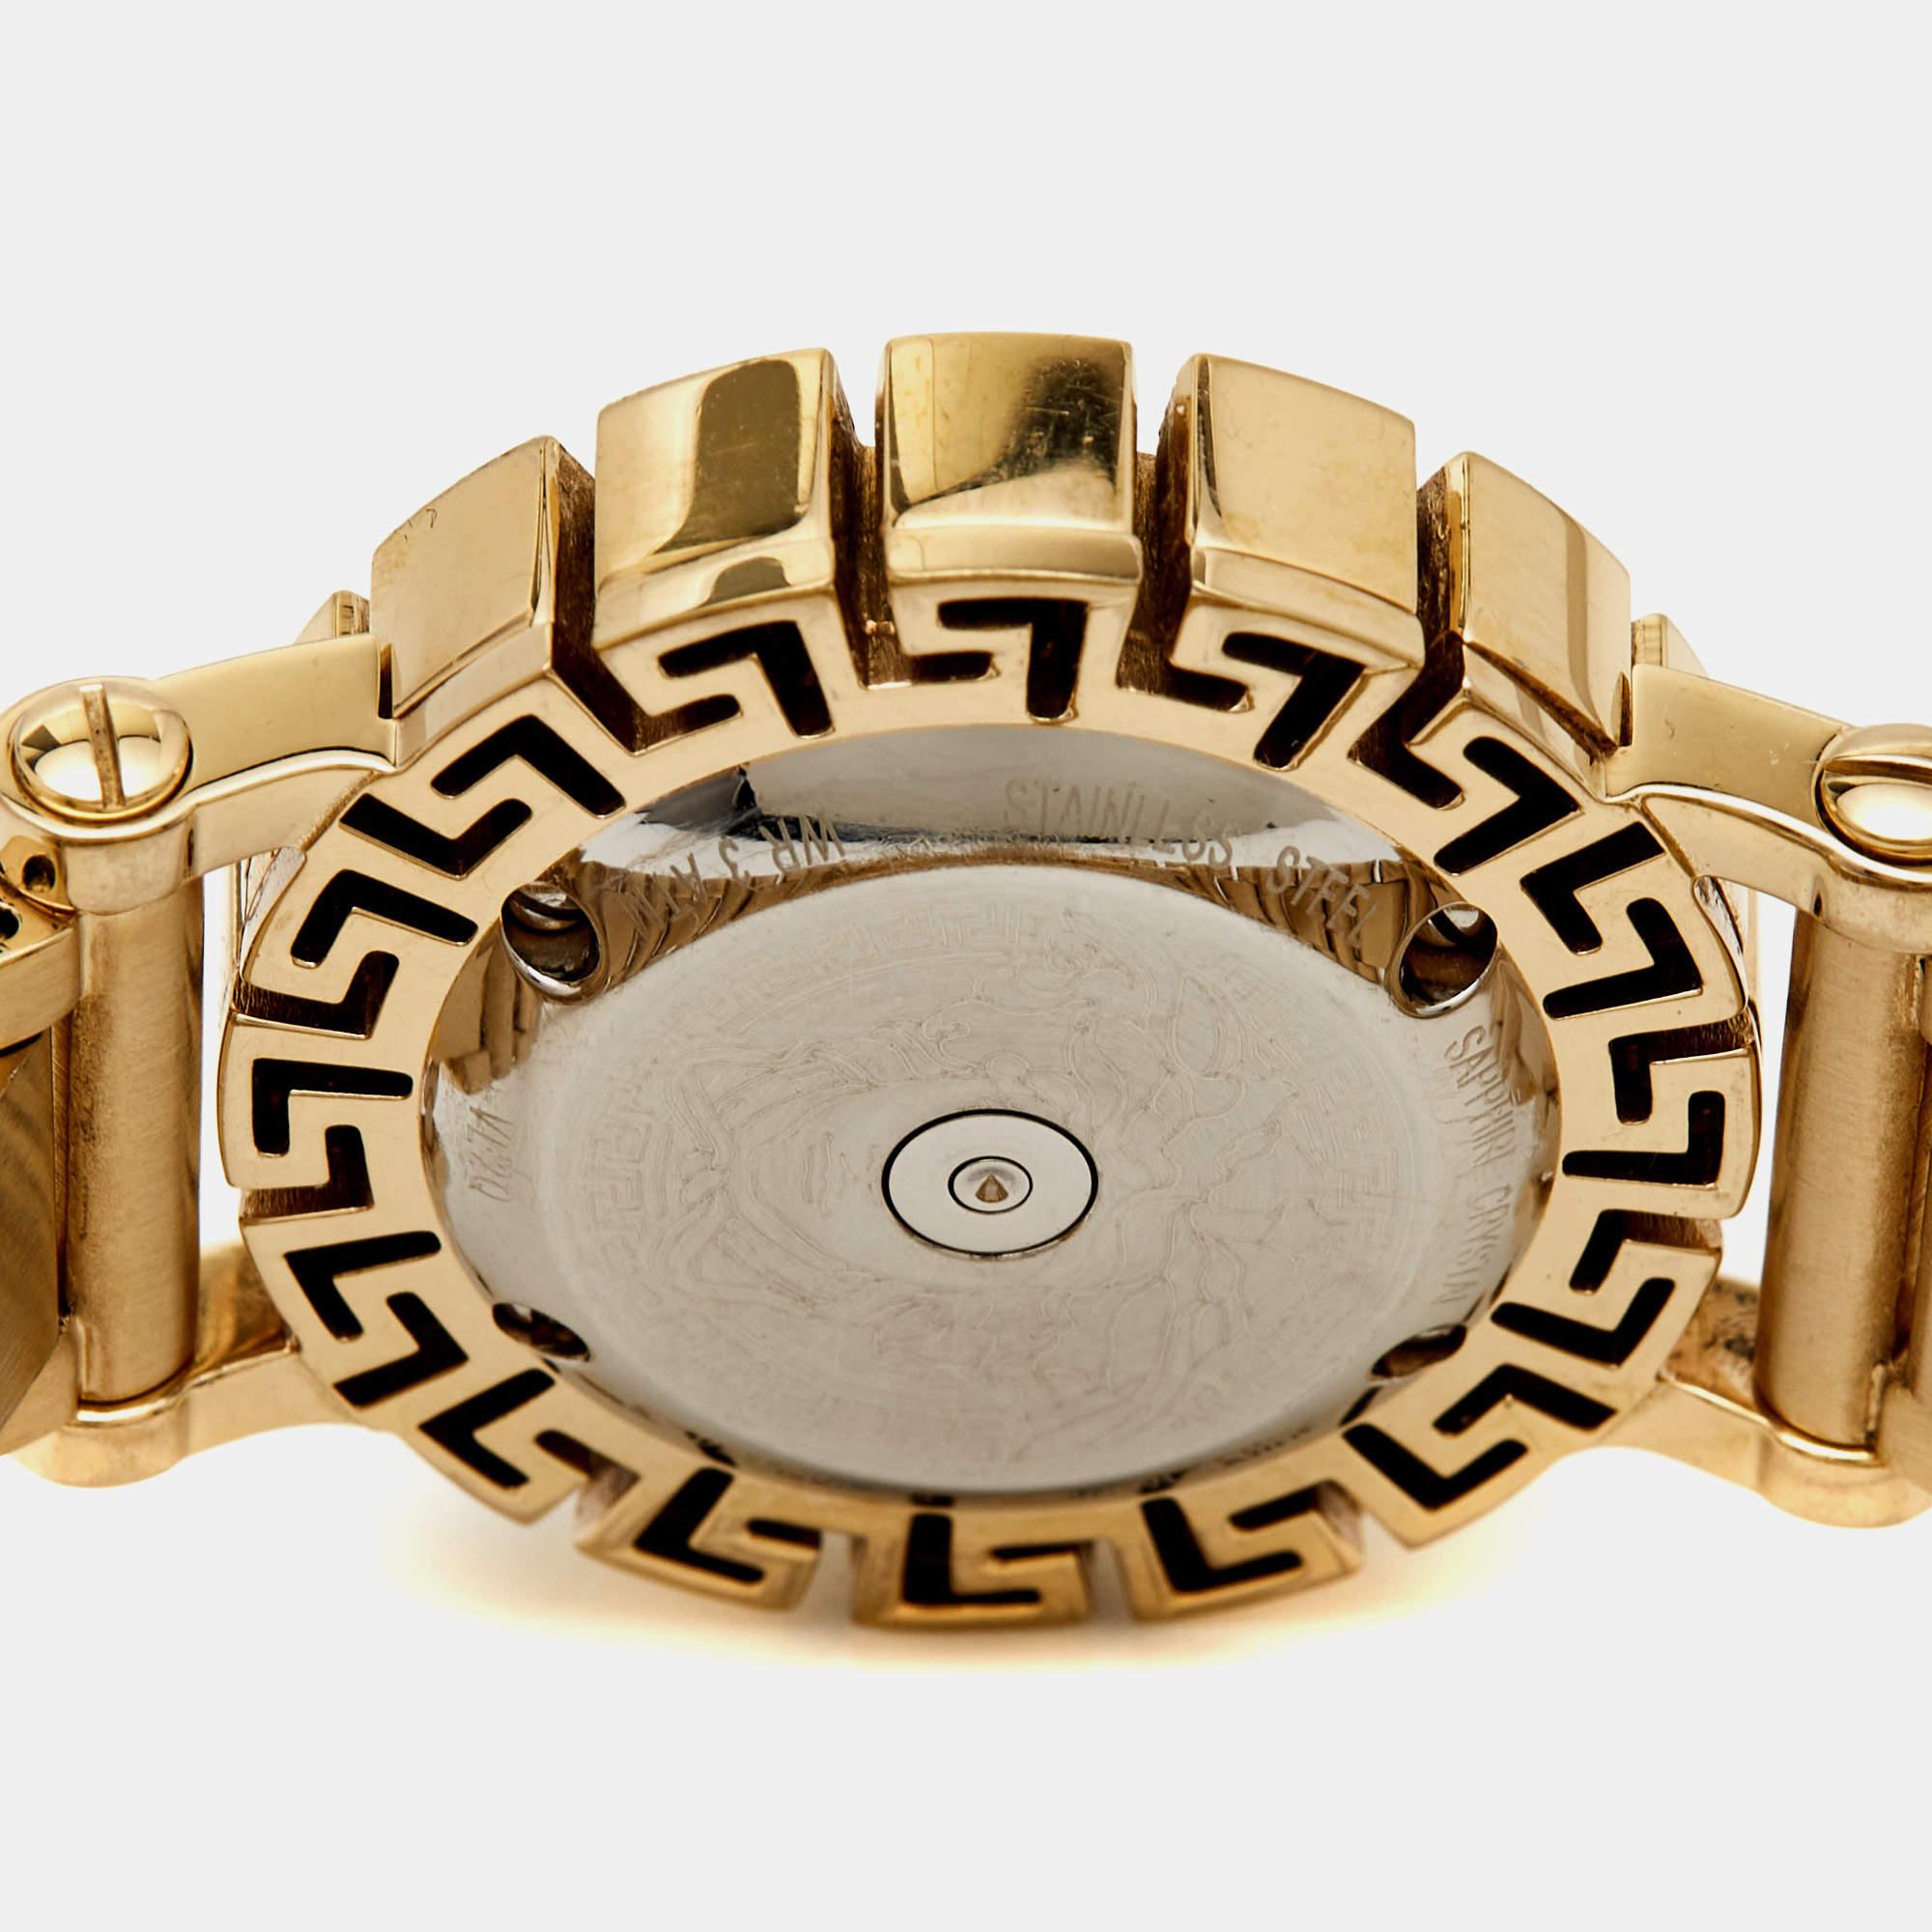 Contemporary Versace Champagne Gold Plated Stainless Greca Glam Women's Wristwatch 29 mm